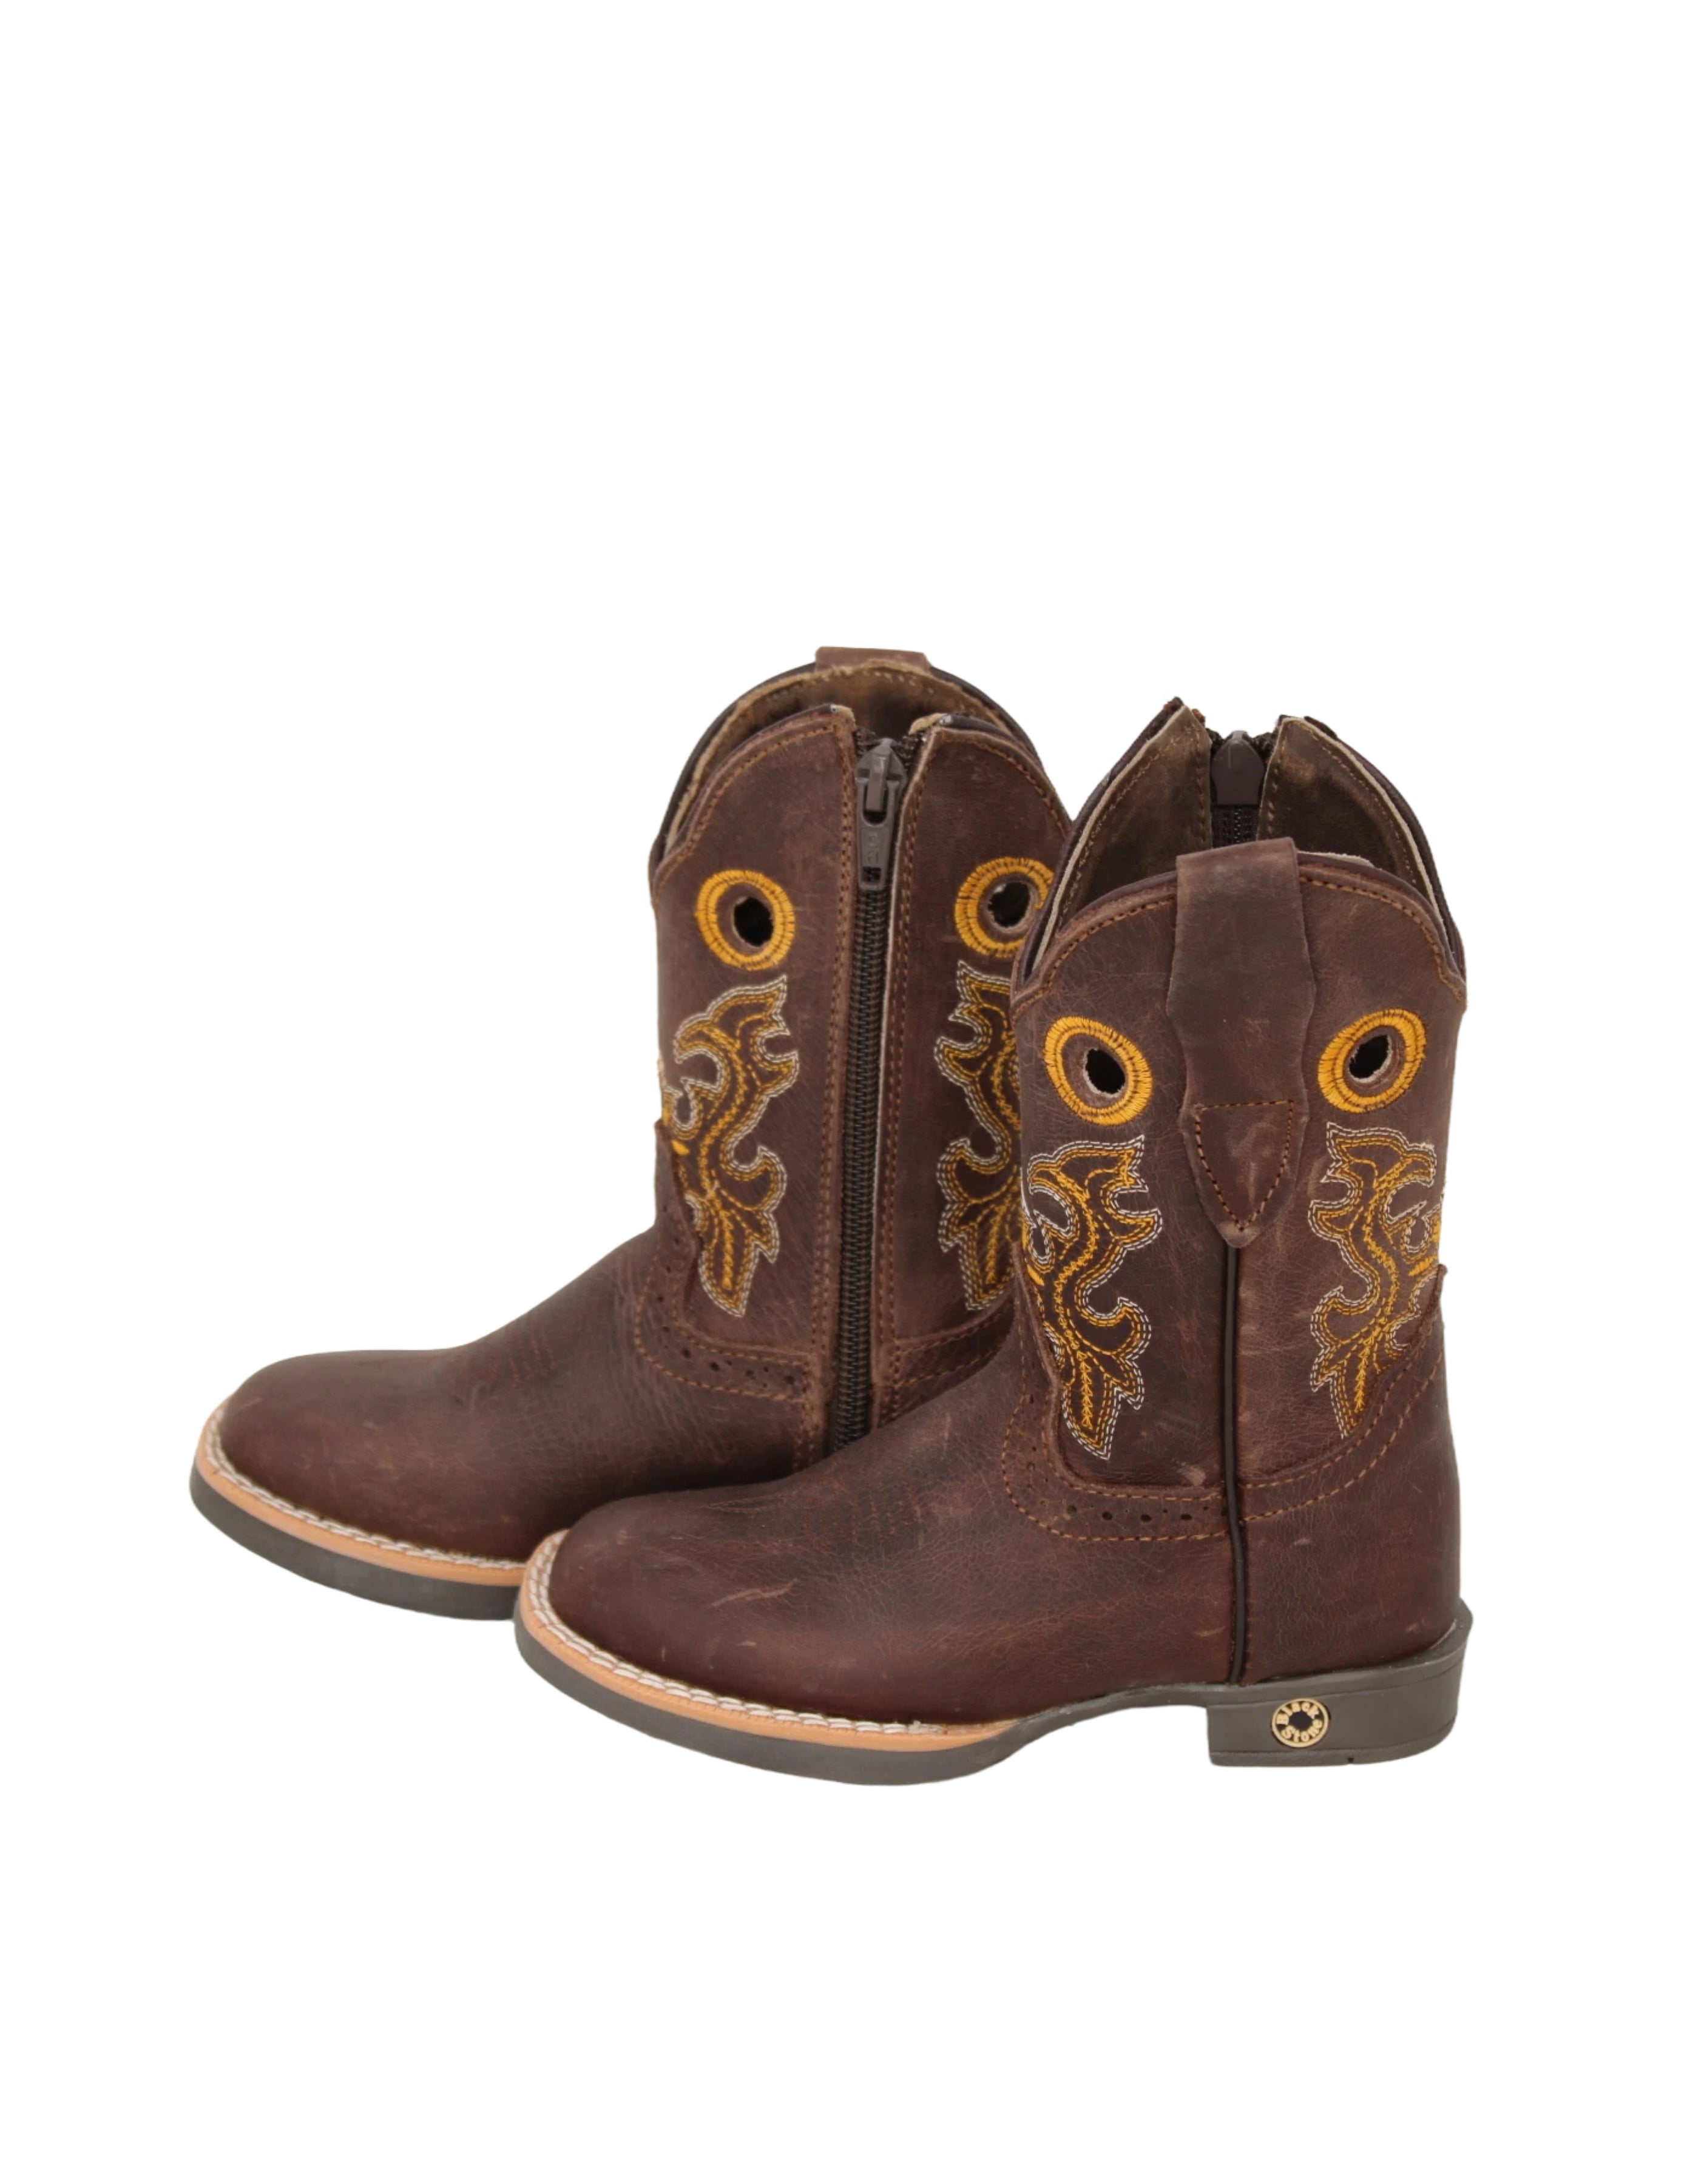 Griffin Kids Leather Boots